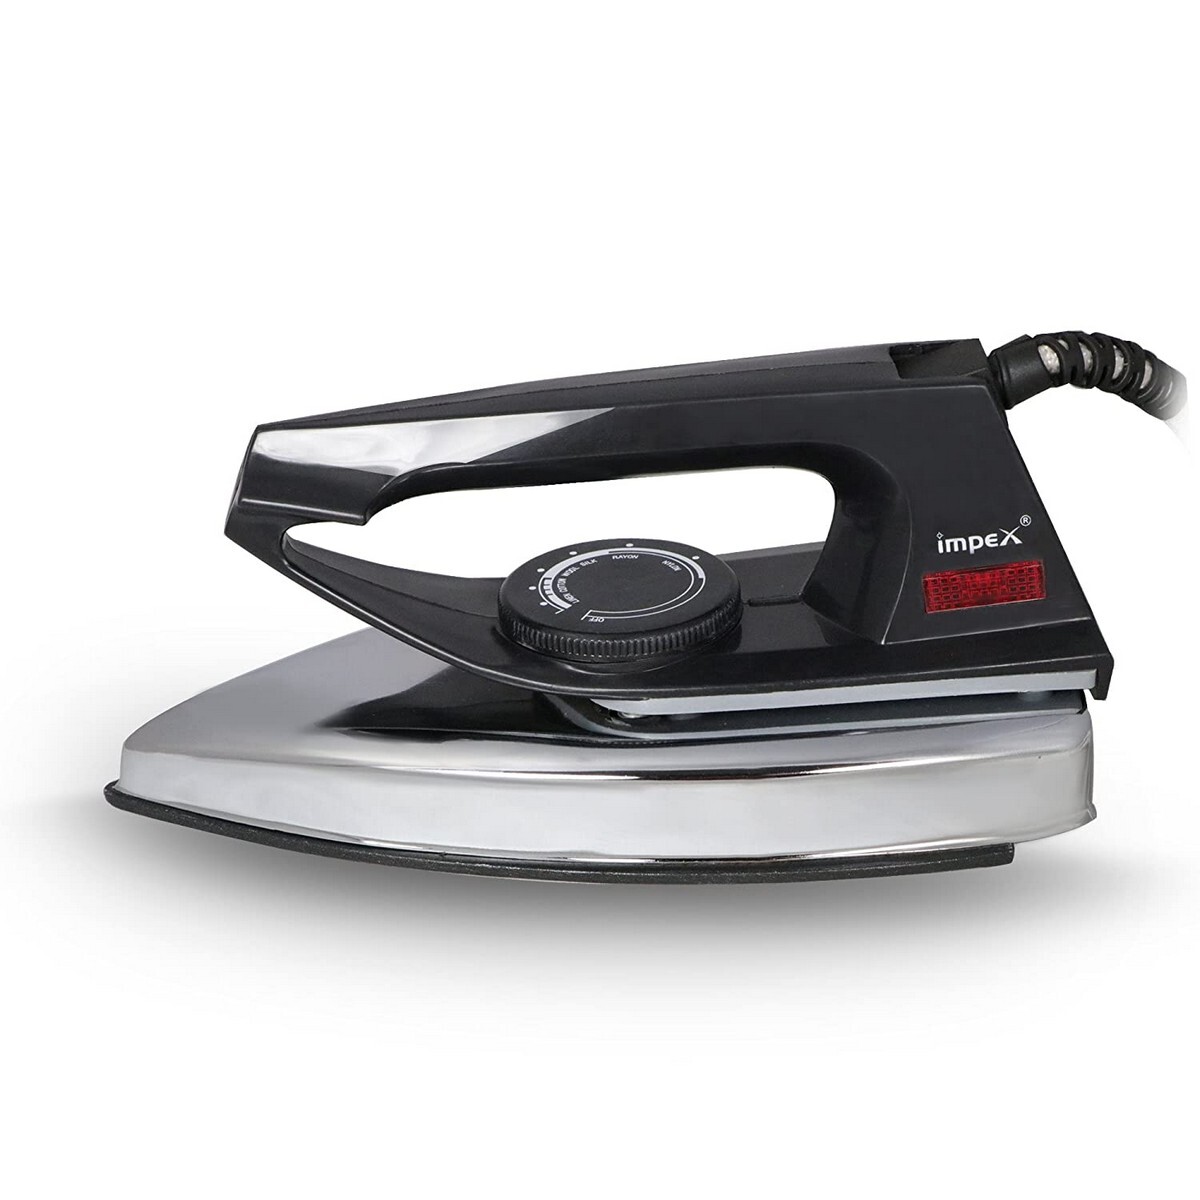 Impex Dry Iron Showy